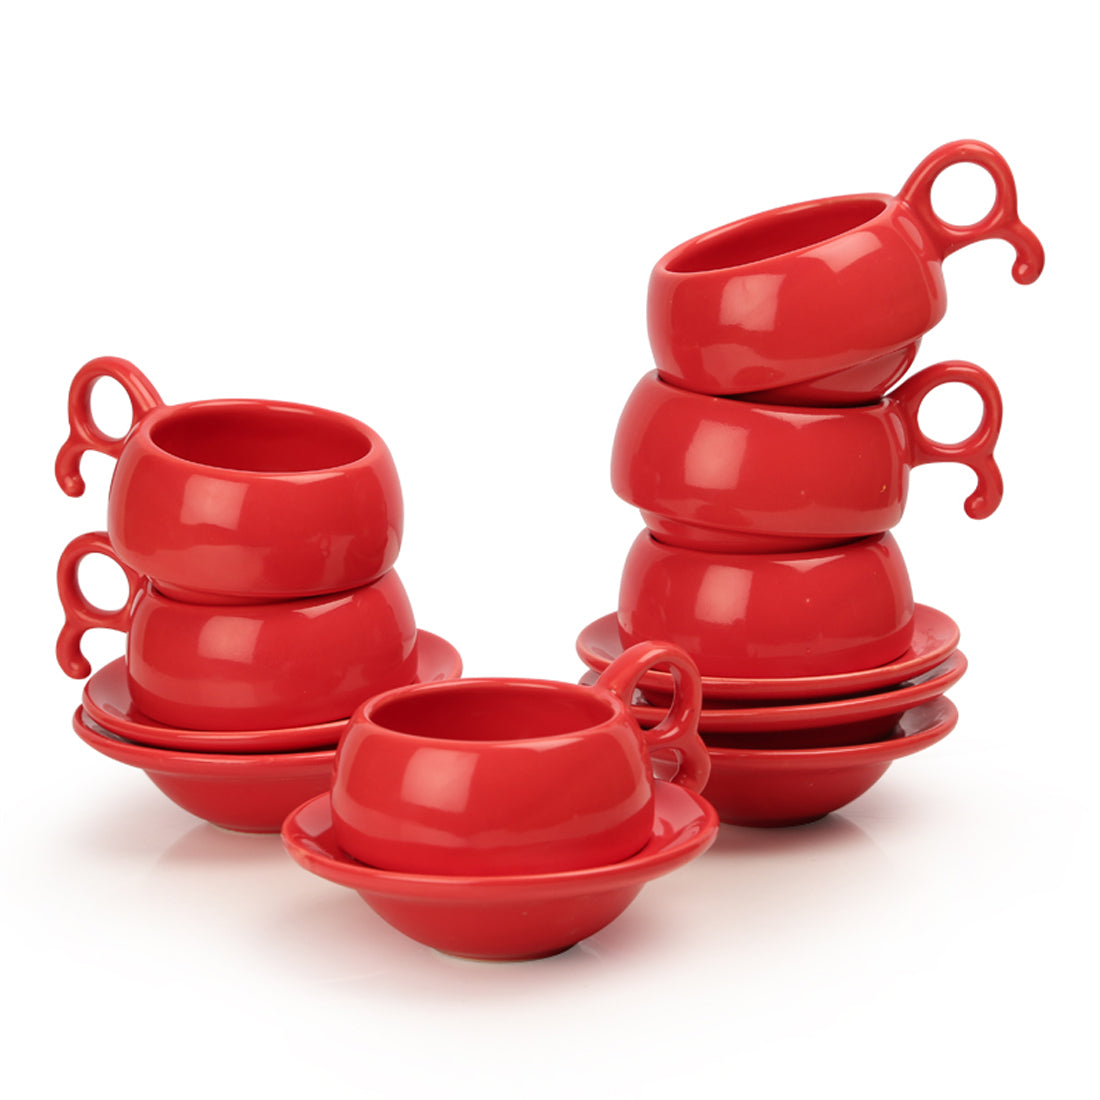 Studio Pottery Ceramic Cup & Saucer Set Of 6-Red